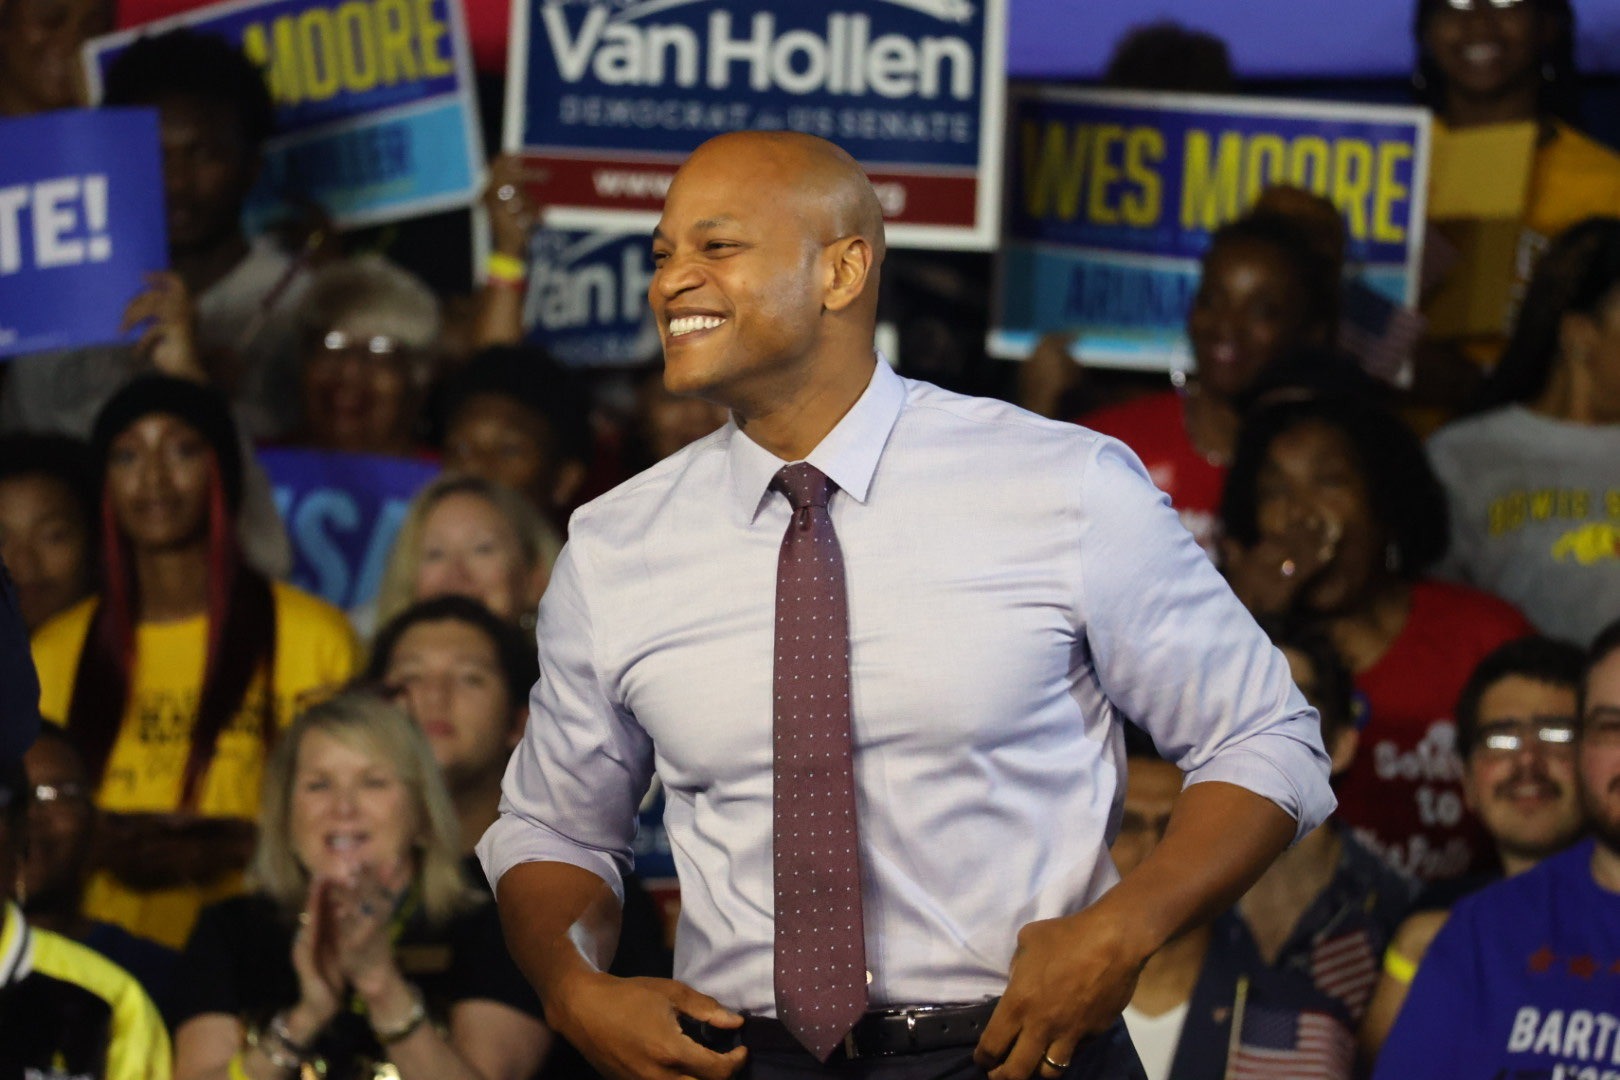 Wes Moore to Become Marylands First Black Governor